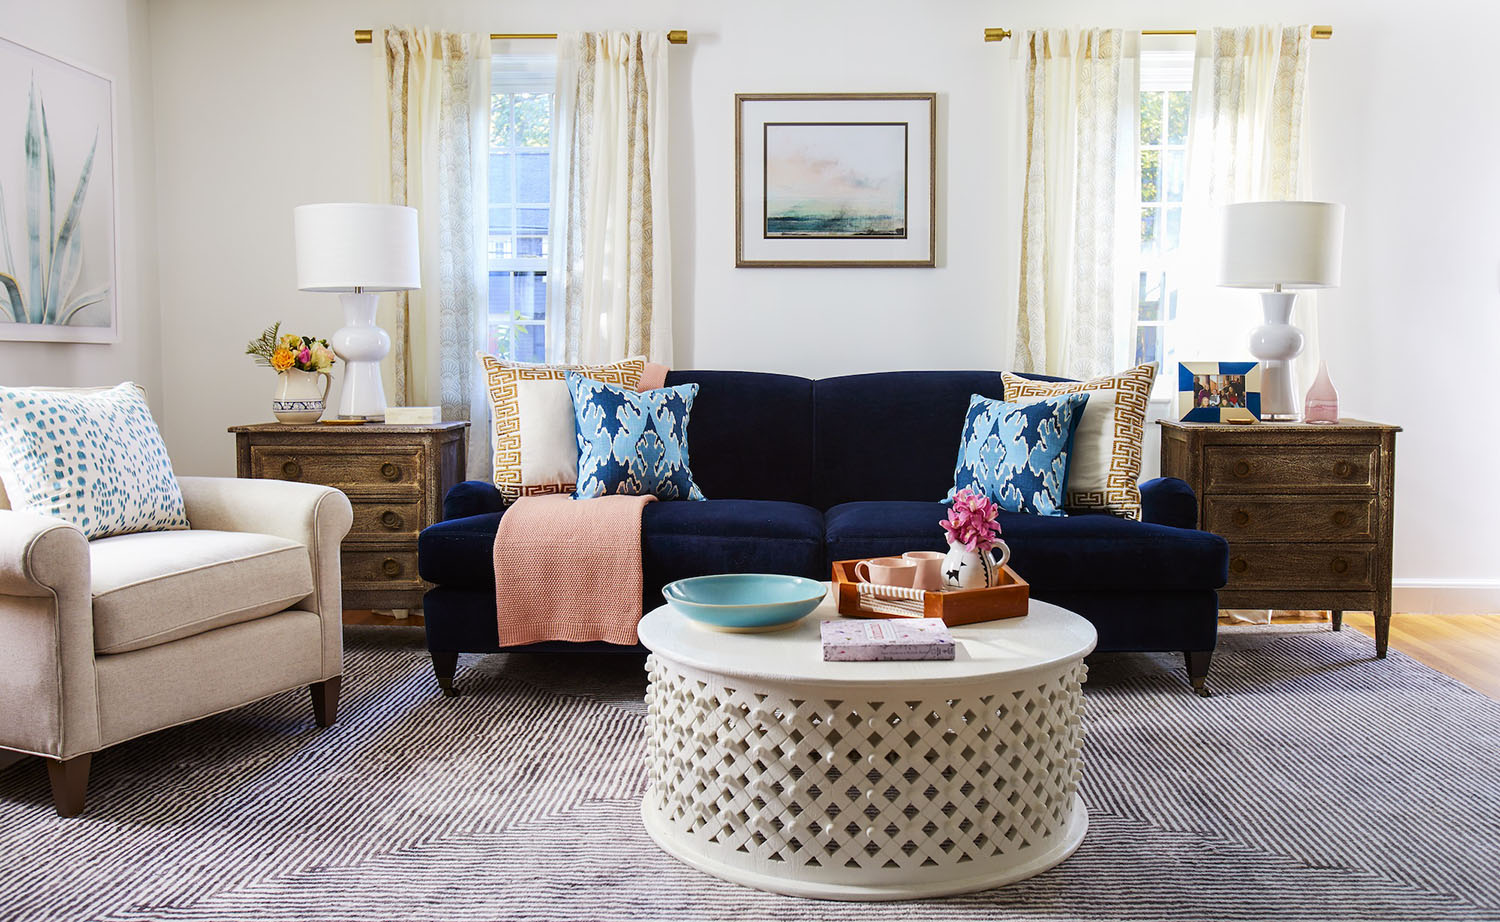 10 Easy Living Room Decorating Ideas for Every Style and Budget